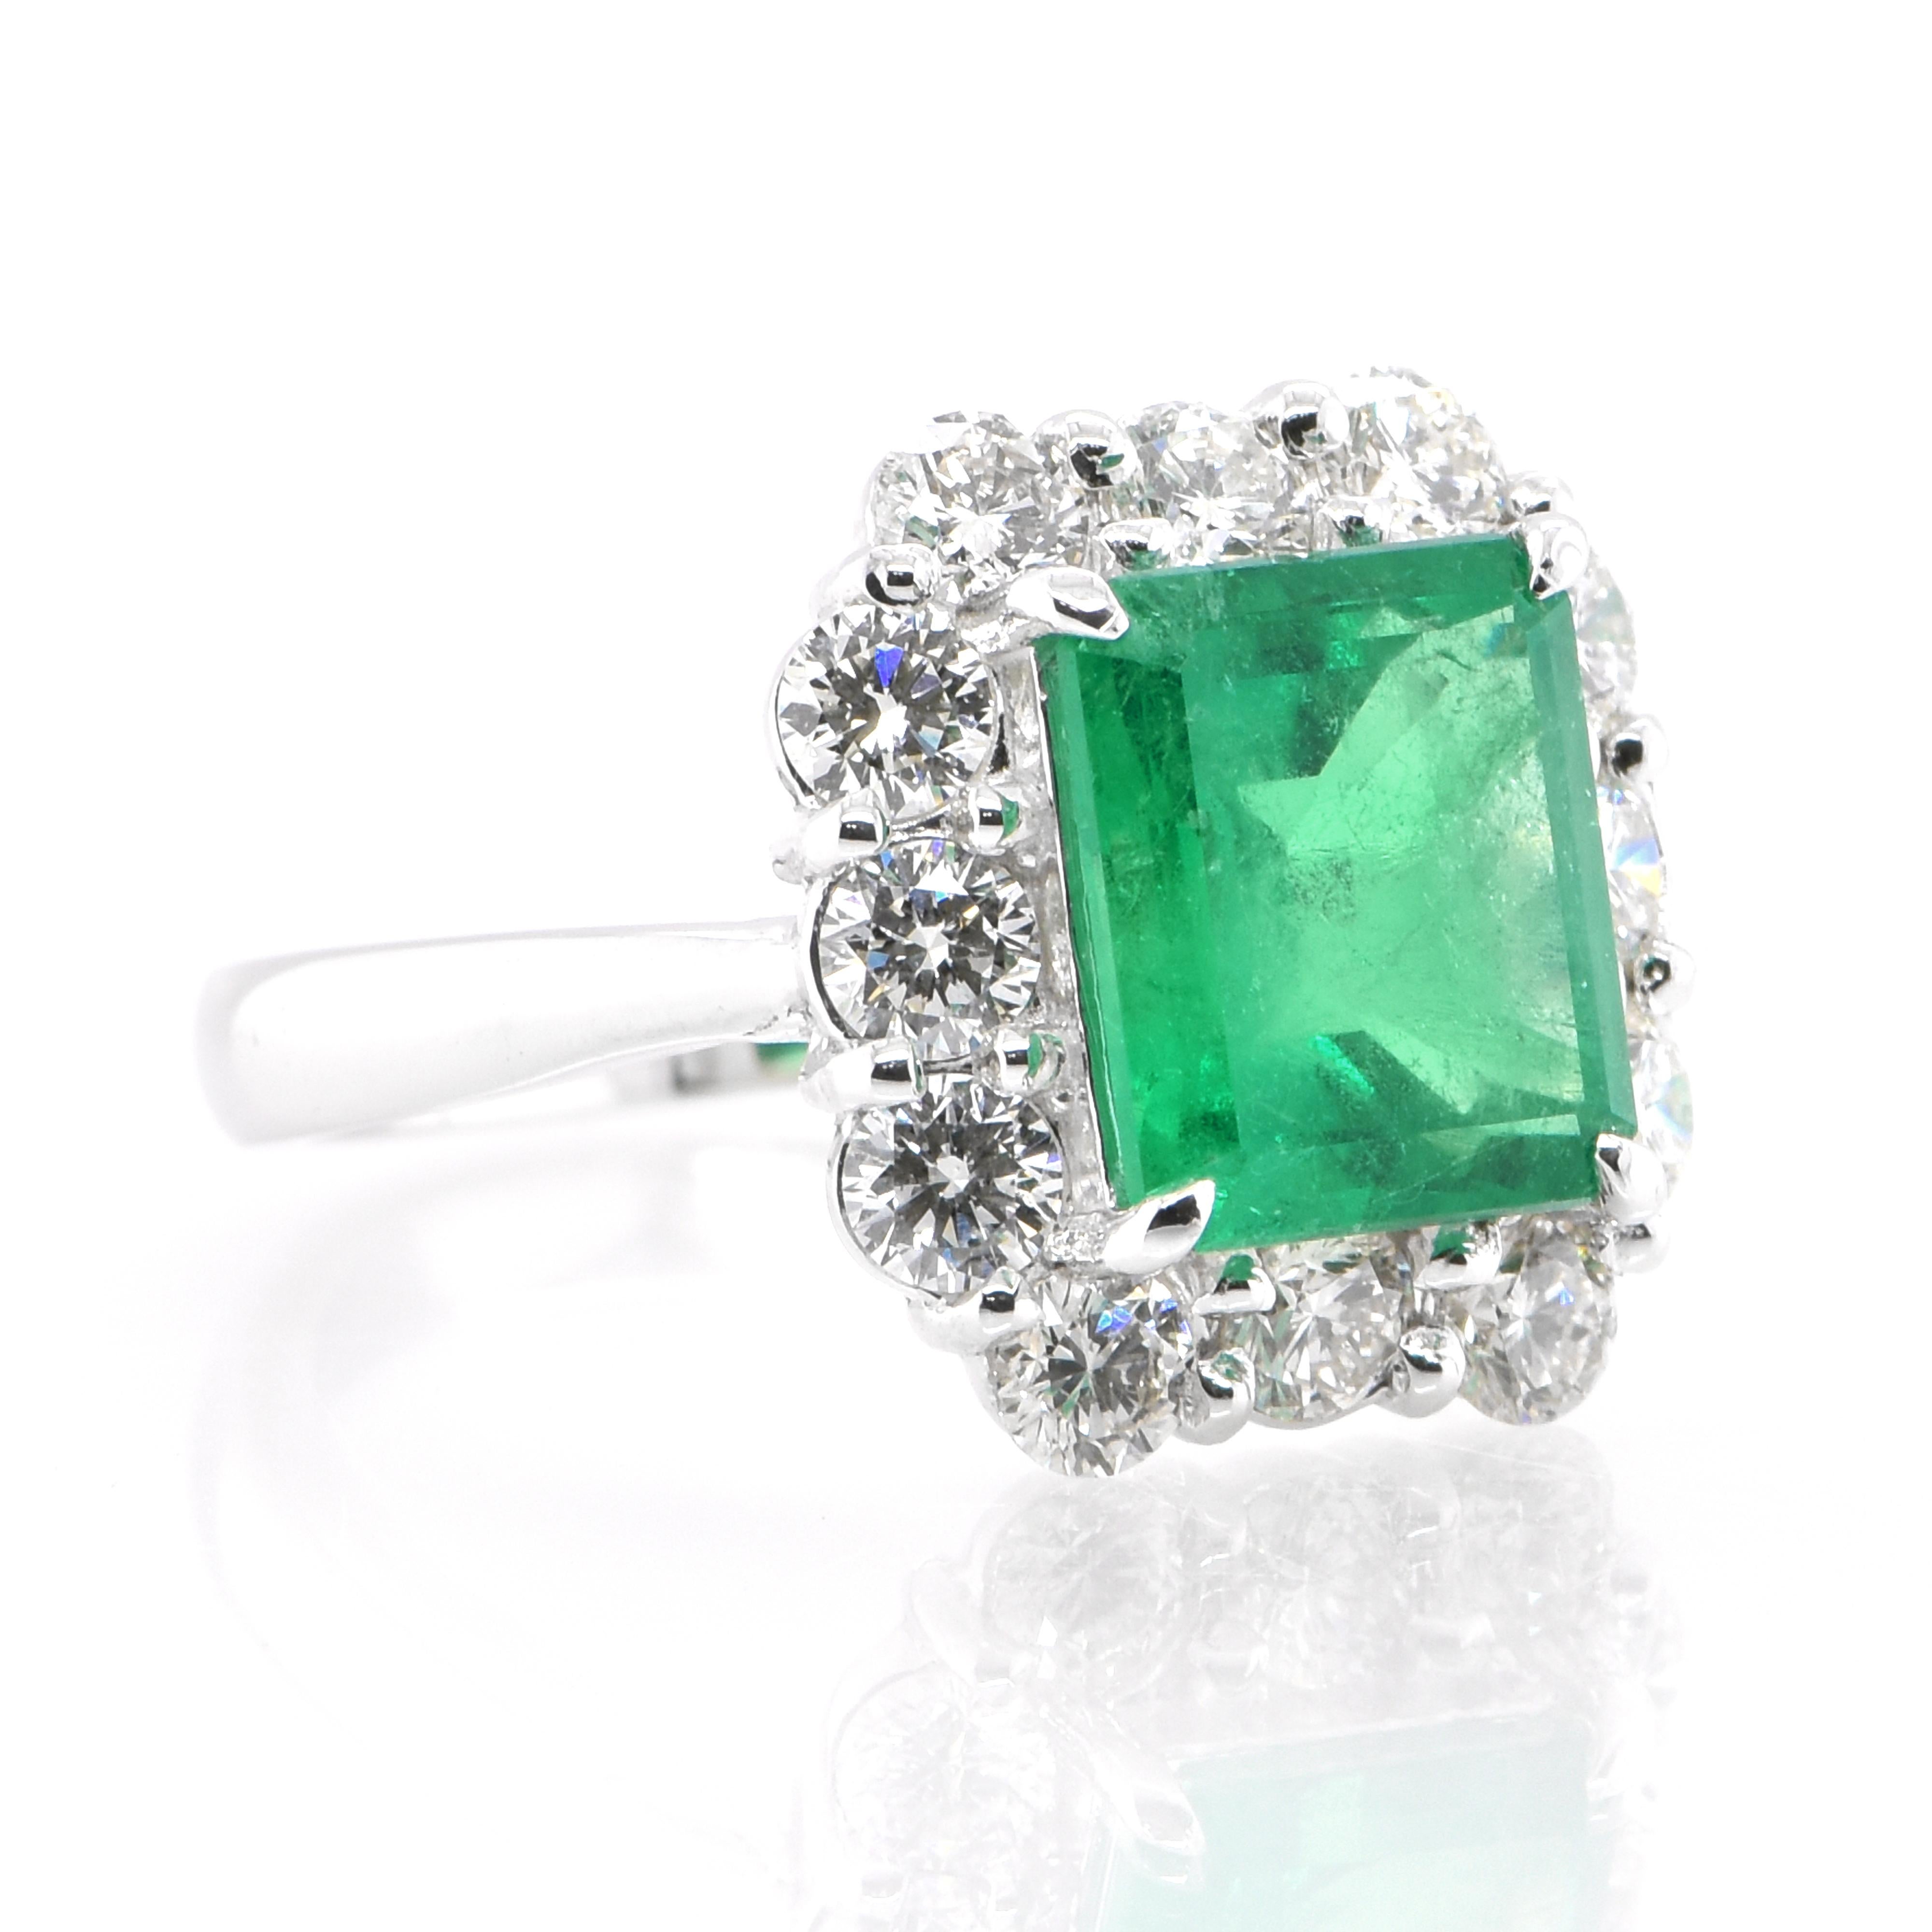 Emerald Cut 2.36 Carat Natural Colombian Emerald and Diamond Ring Set in Platinum